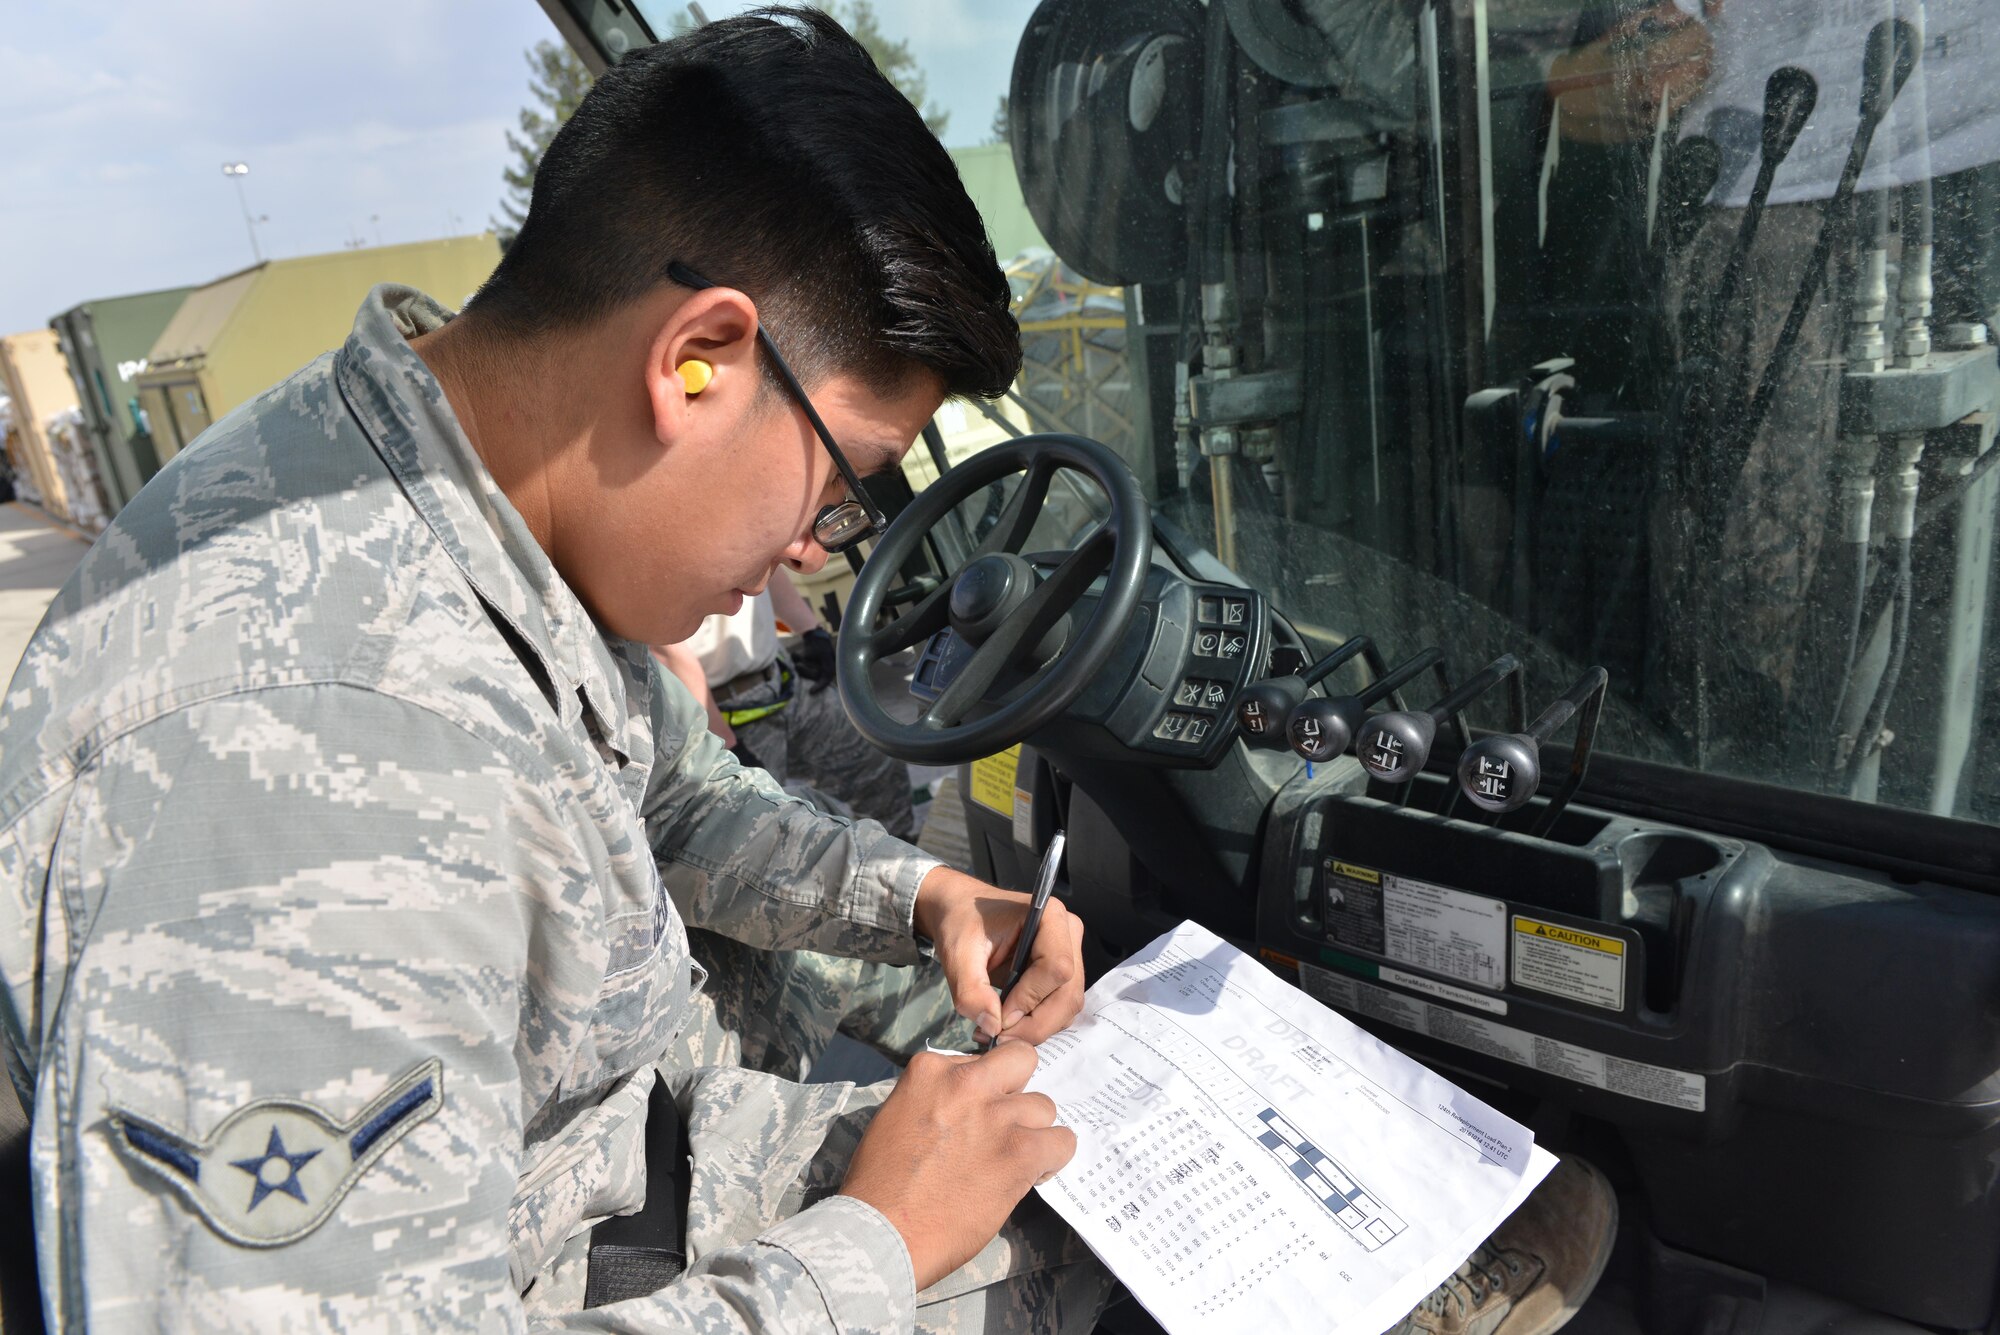 U.S. Air Force Airman Kyle George, 728th Air Mobility Squadron air transportation journeyman, annotates cargo weight on a load plan Oct. 18, 2016, at Incirlik Air Base, Turkey. The load plan contains information such as tracking numbers, cargo quantity and weight. (U.S. Air Force photo by Senior Airman John Nieves Camacho)